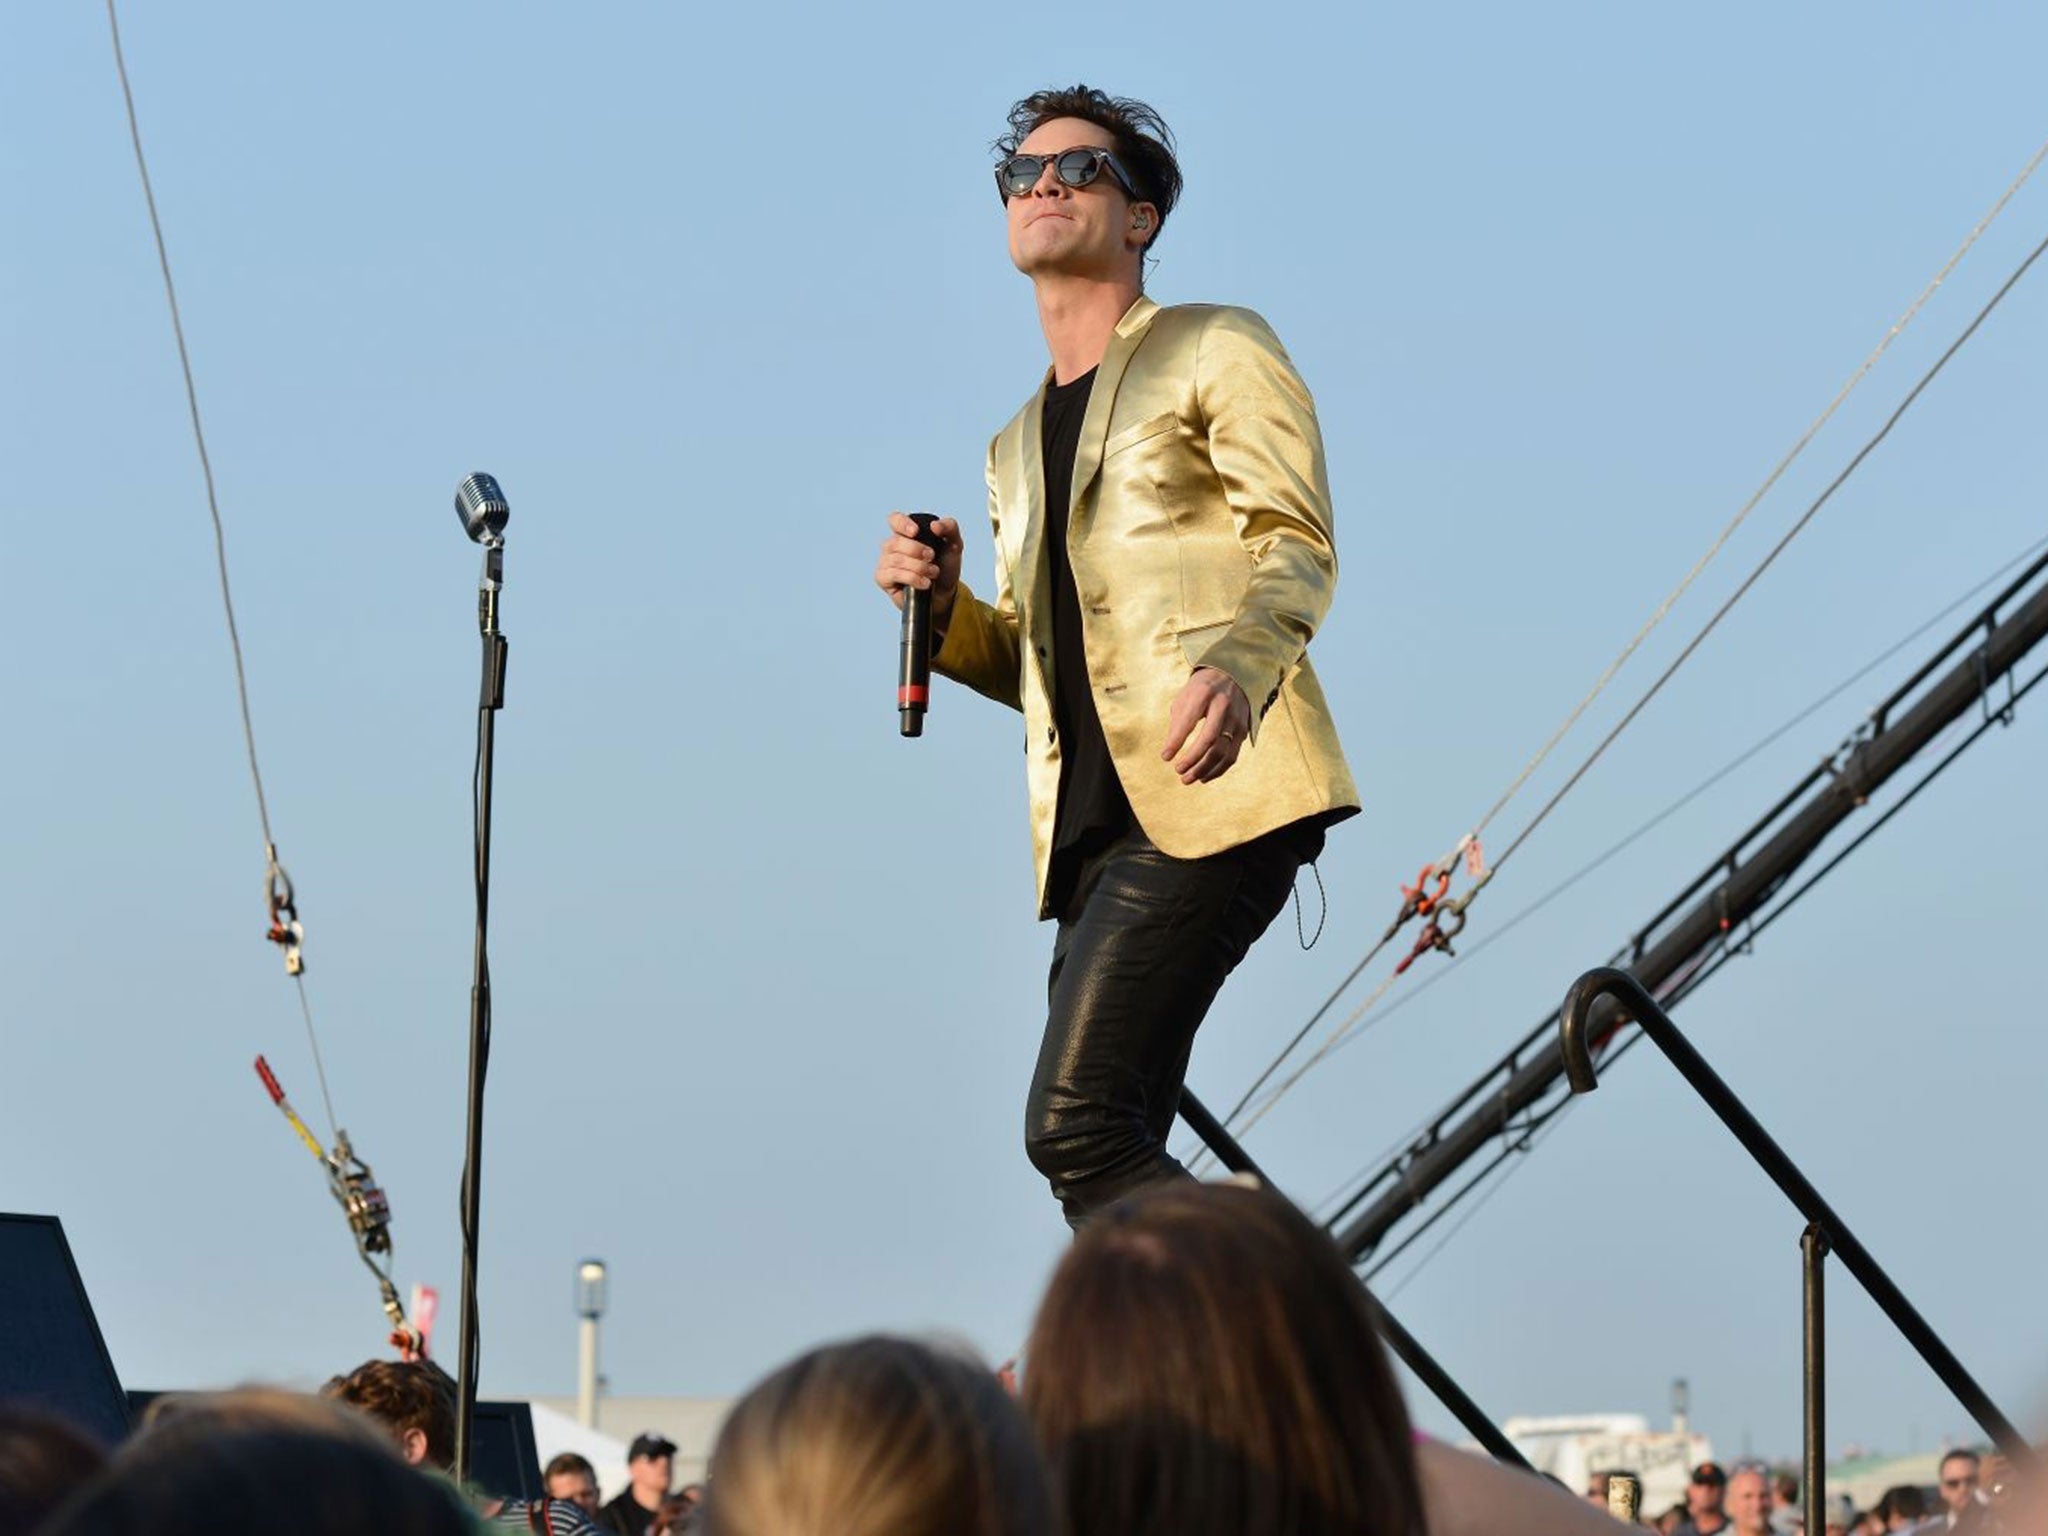 Panic! at the disco performing